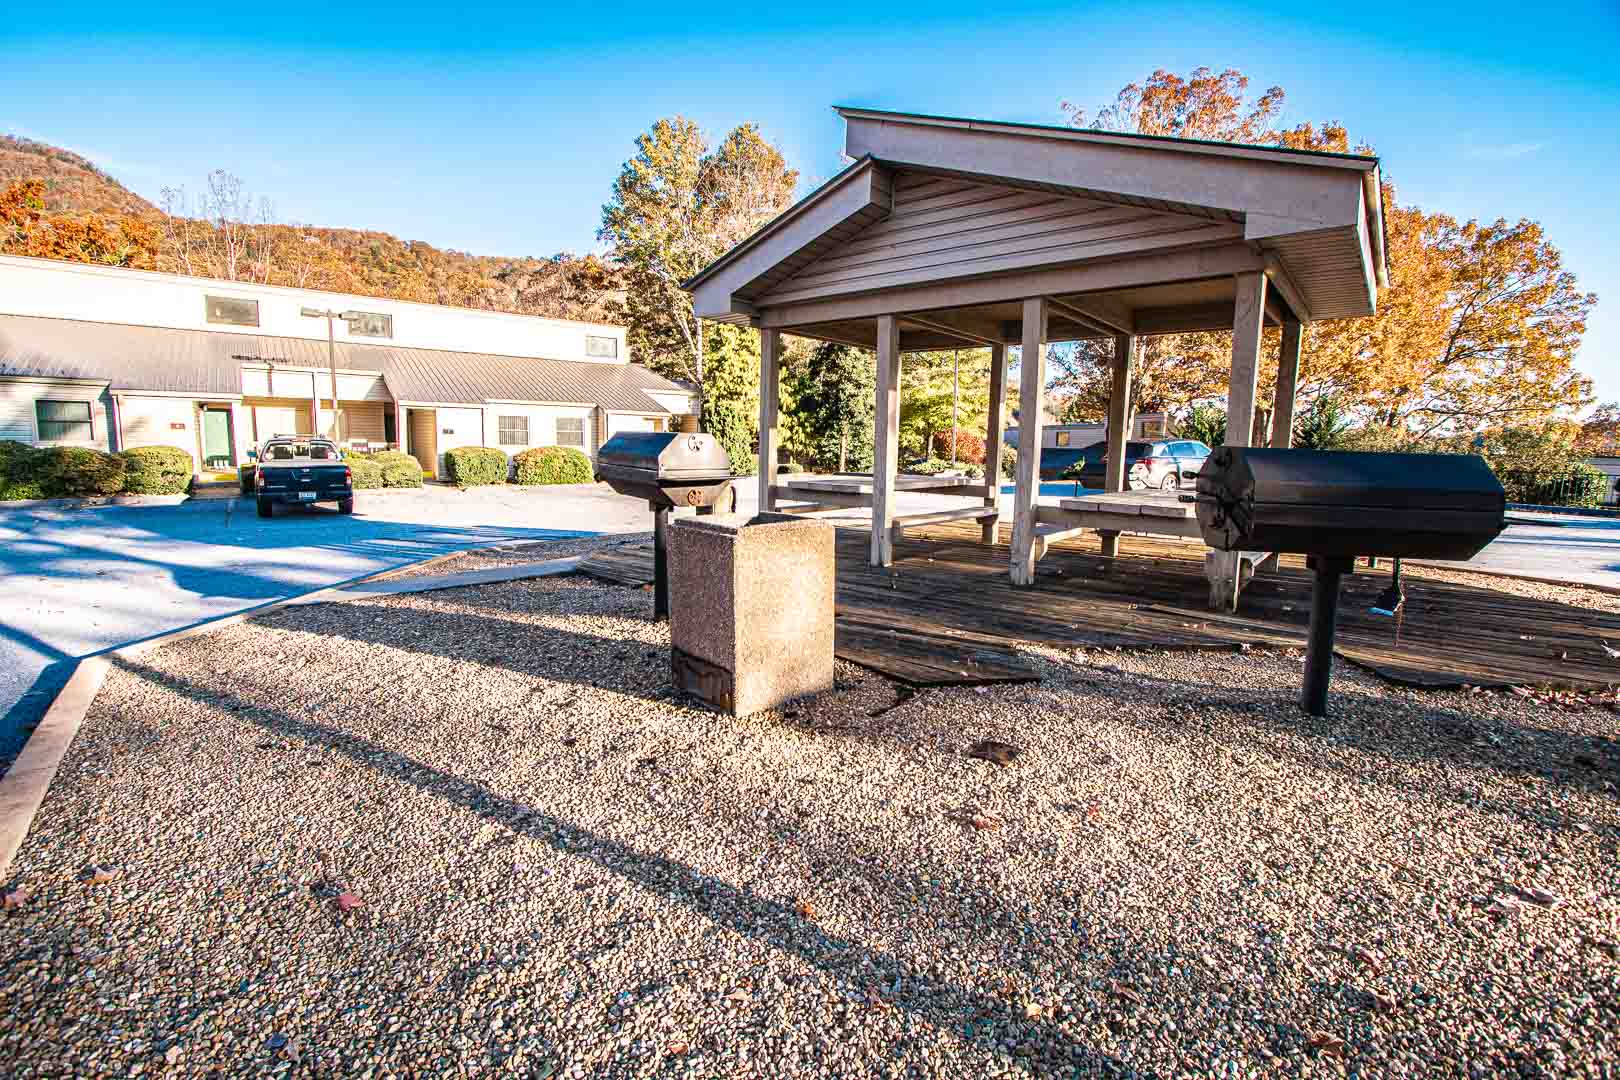 A peaceful BBQ area at VRI's Fairways of the Mountains in North Carolina.